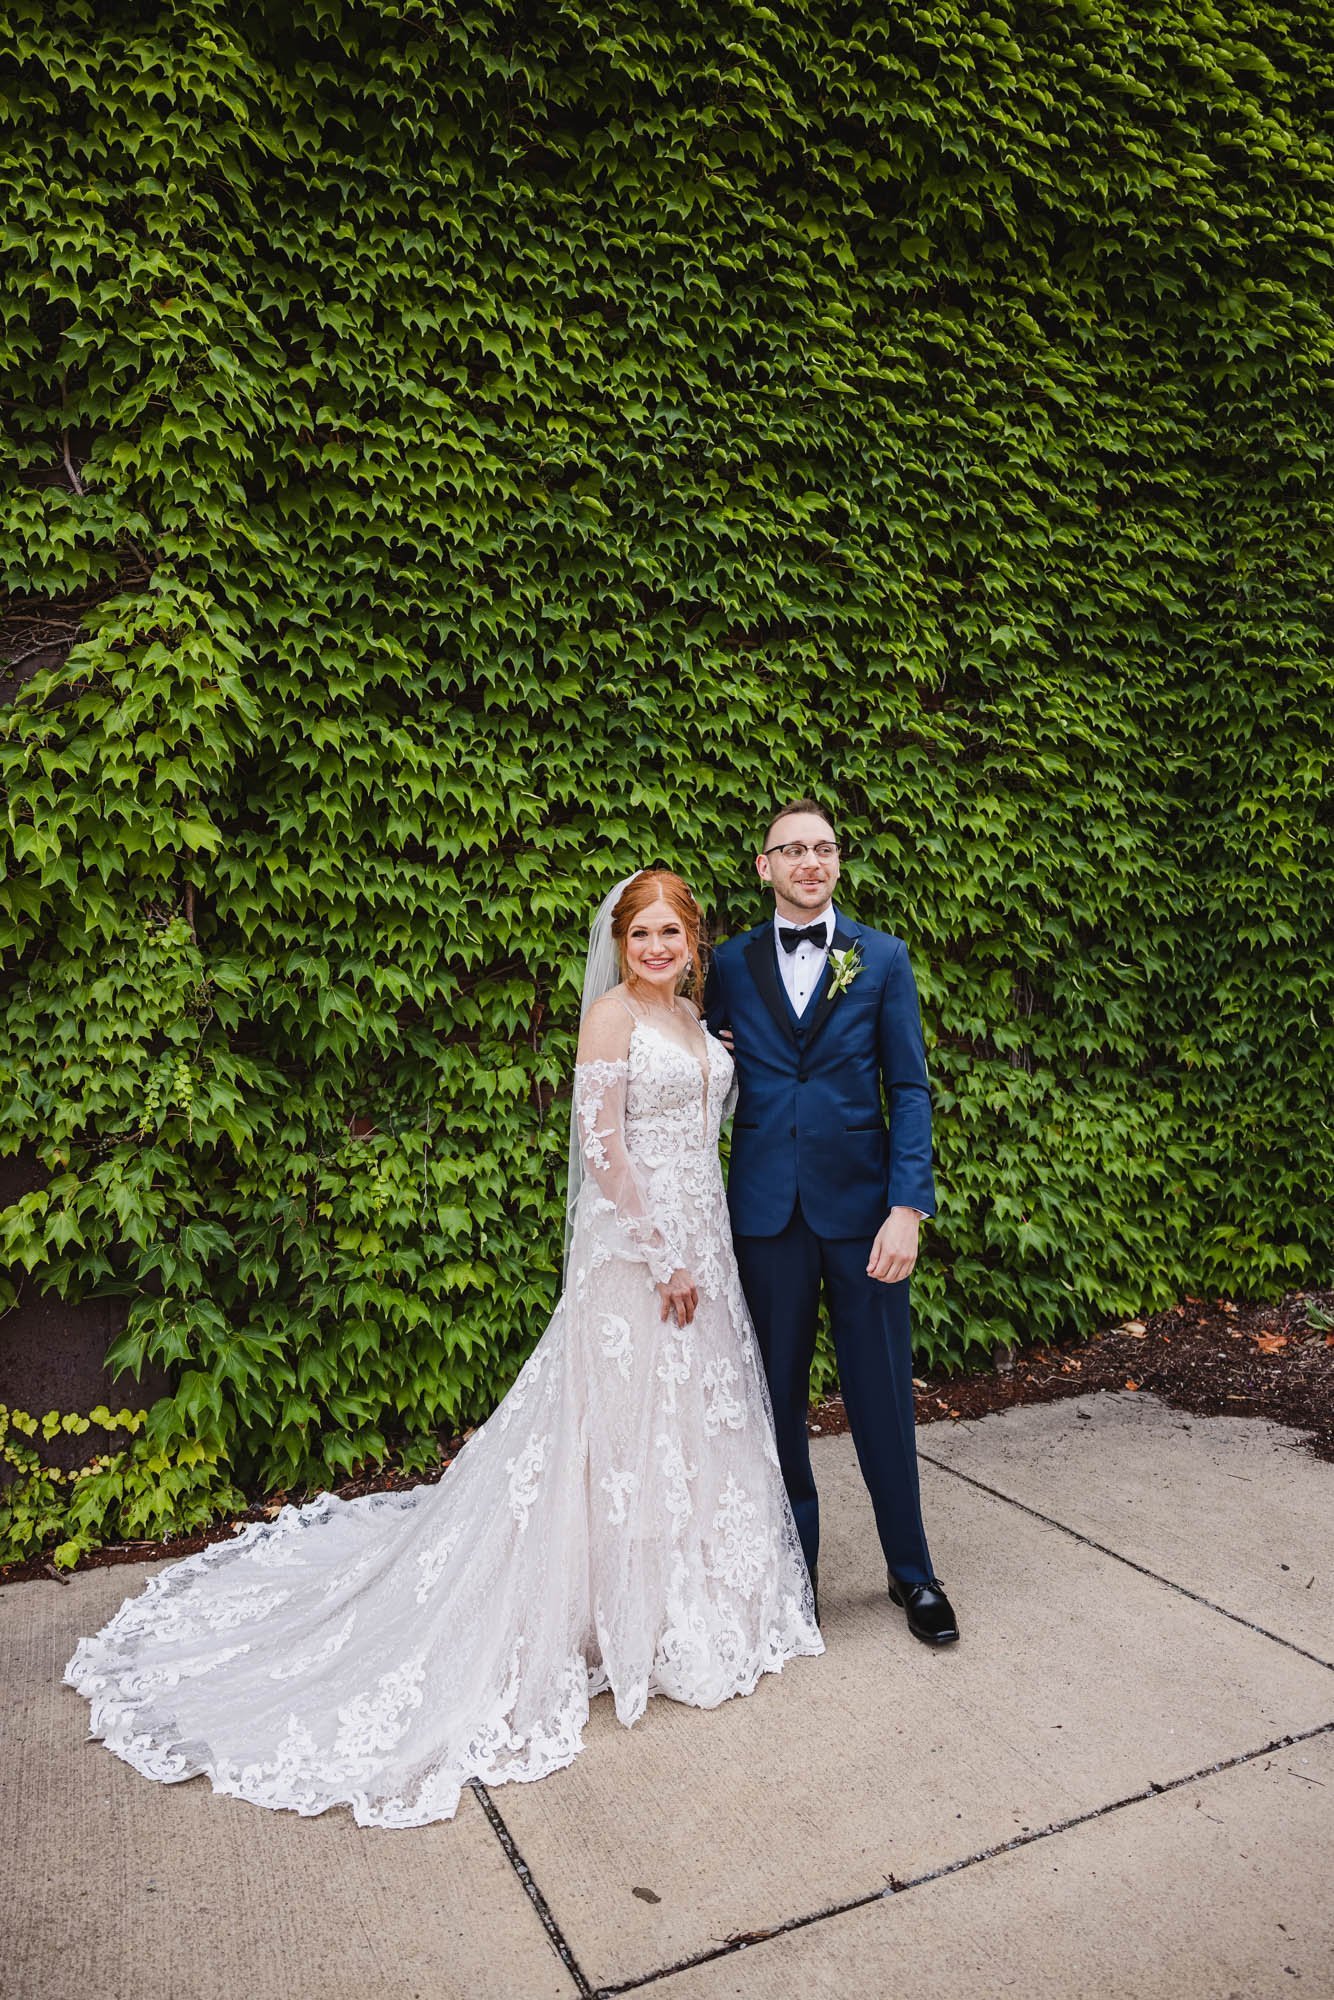 Bride and groom portrait in Peoria Illinois Warehouse District Ivy Wall